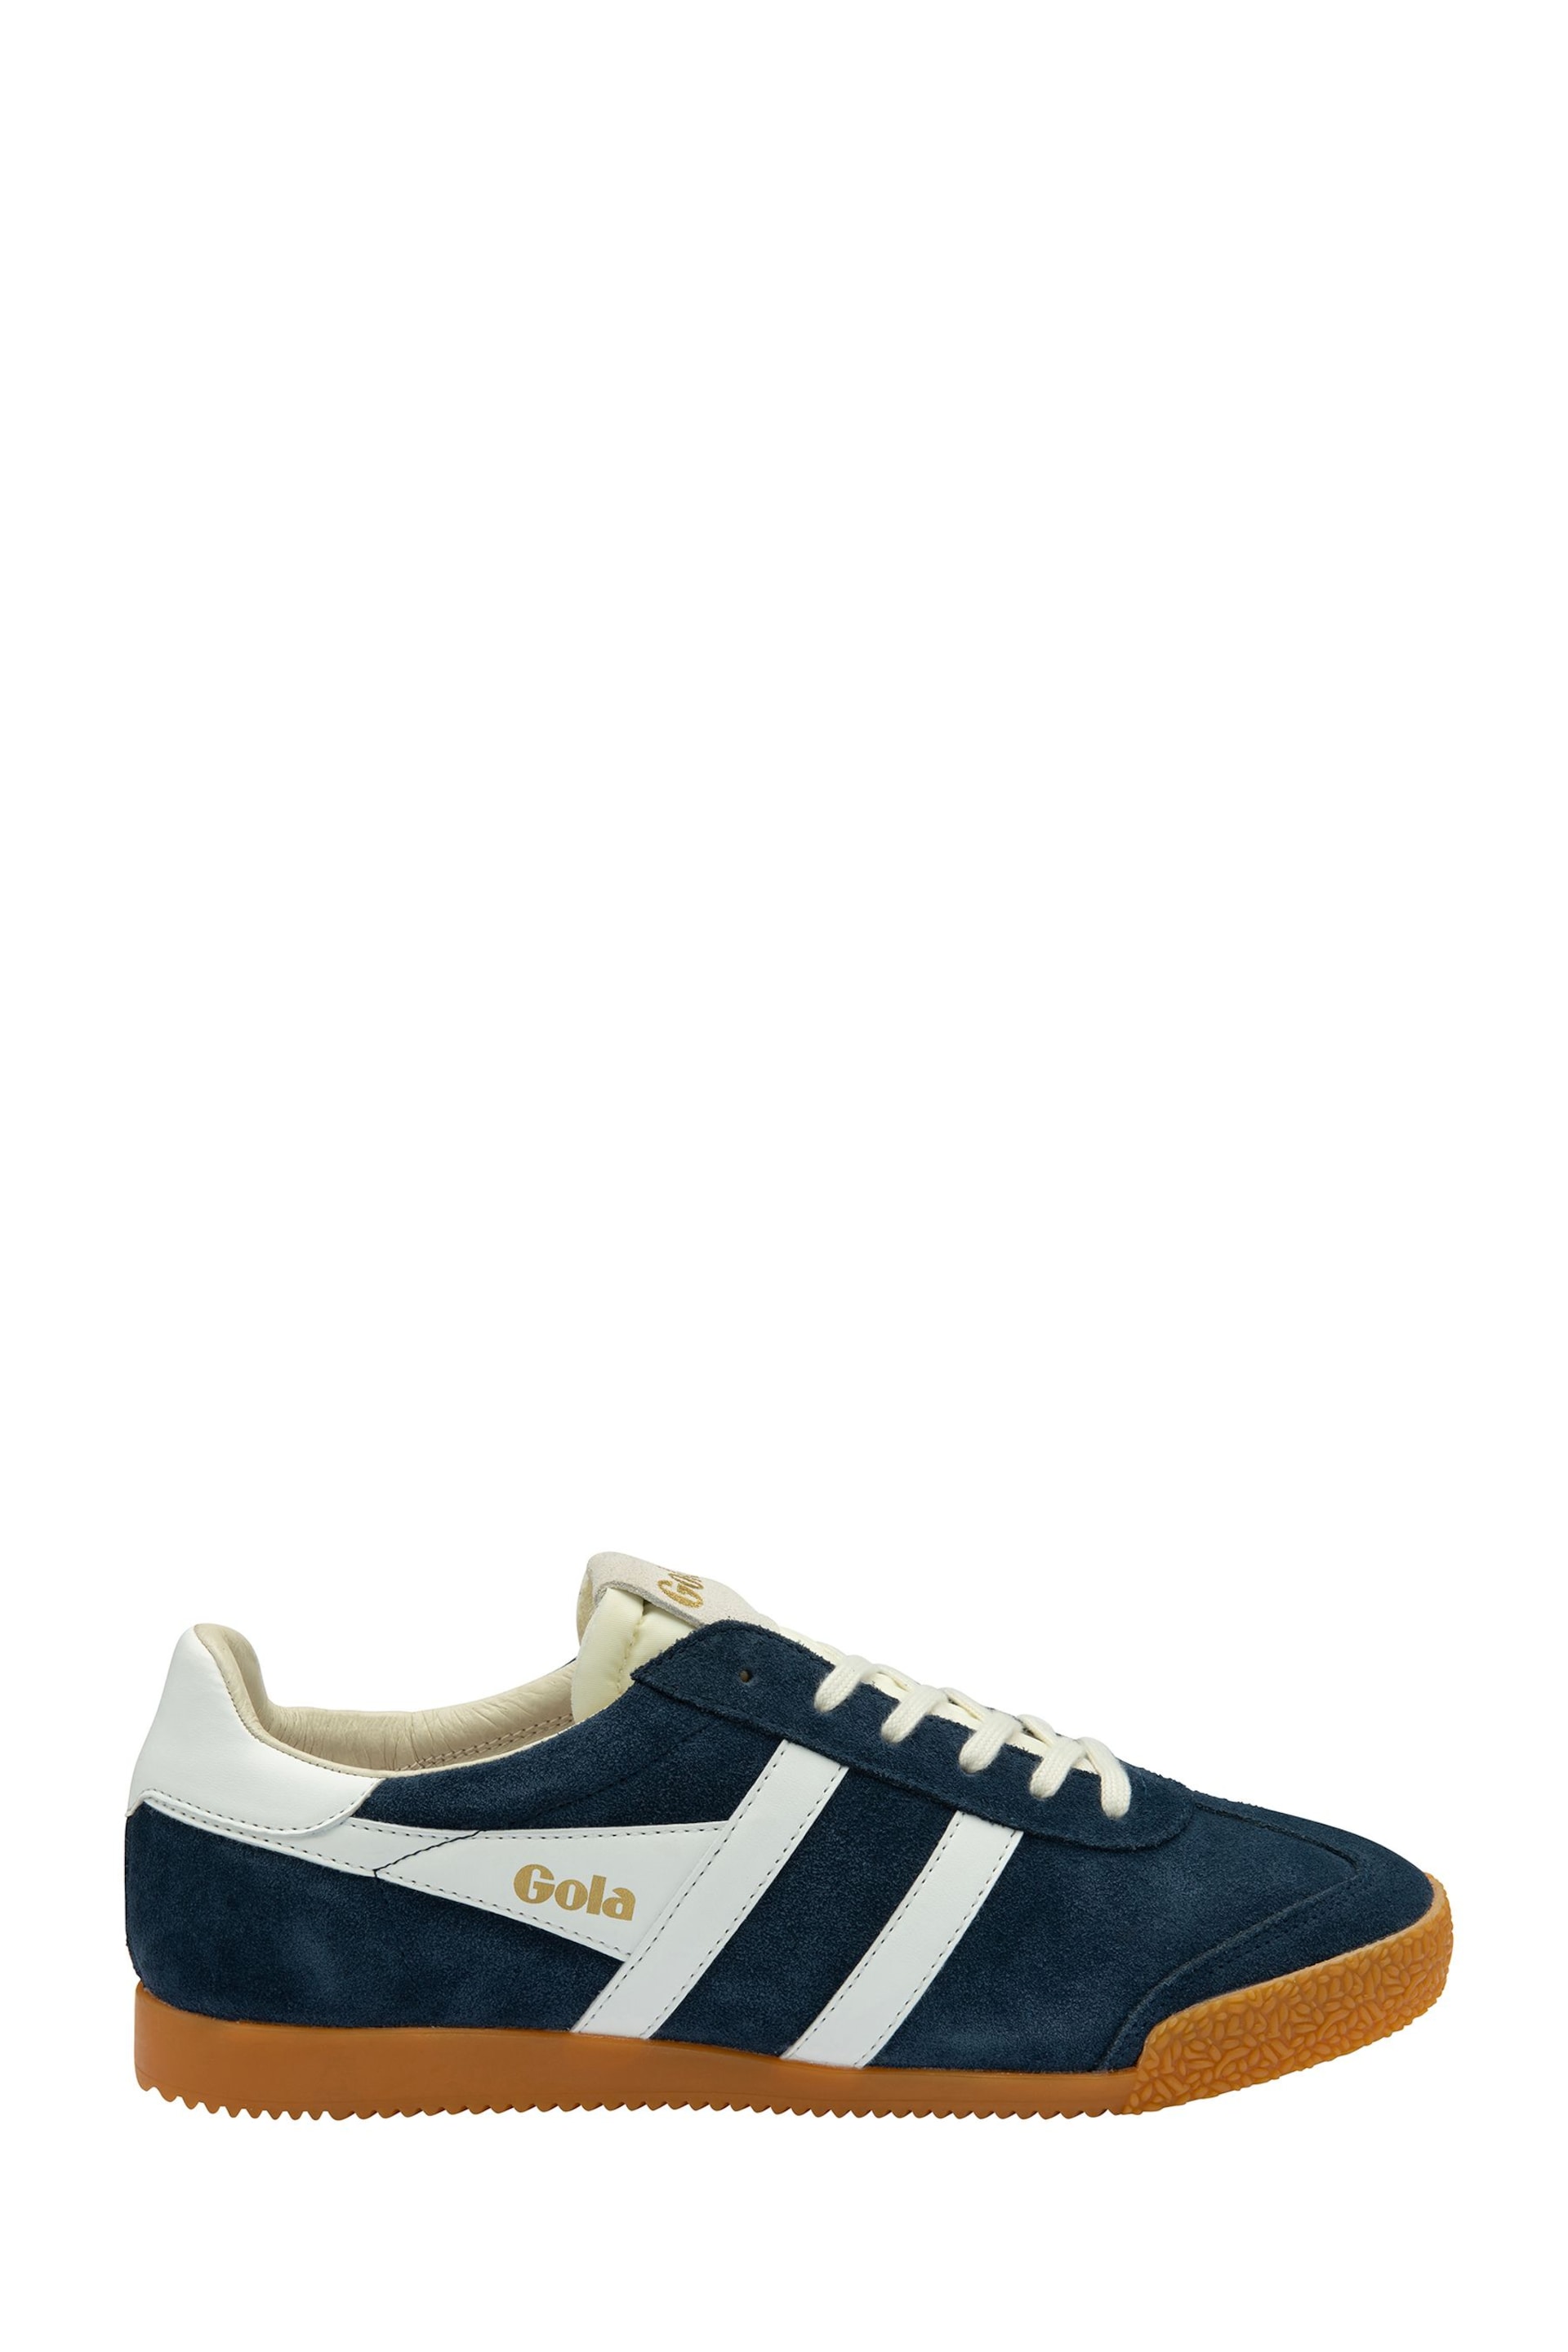 Gola Blue Mens Elan Suede Lace-Up Trainers - Image 1 of 4